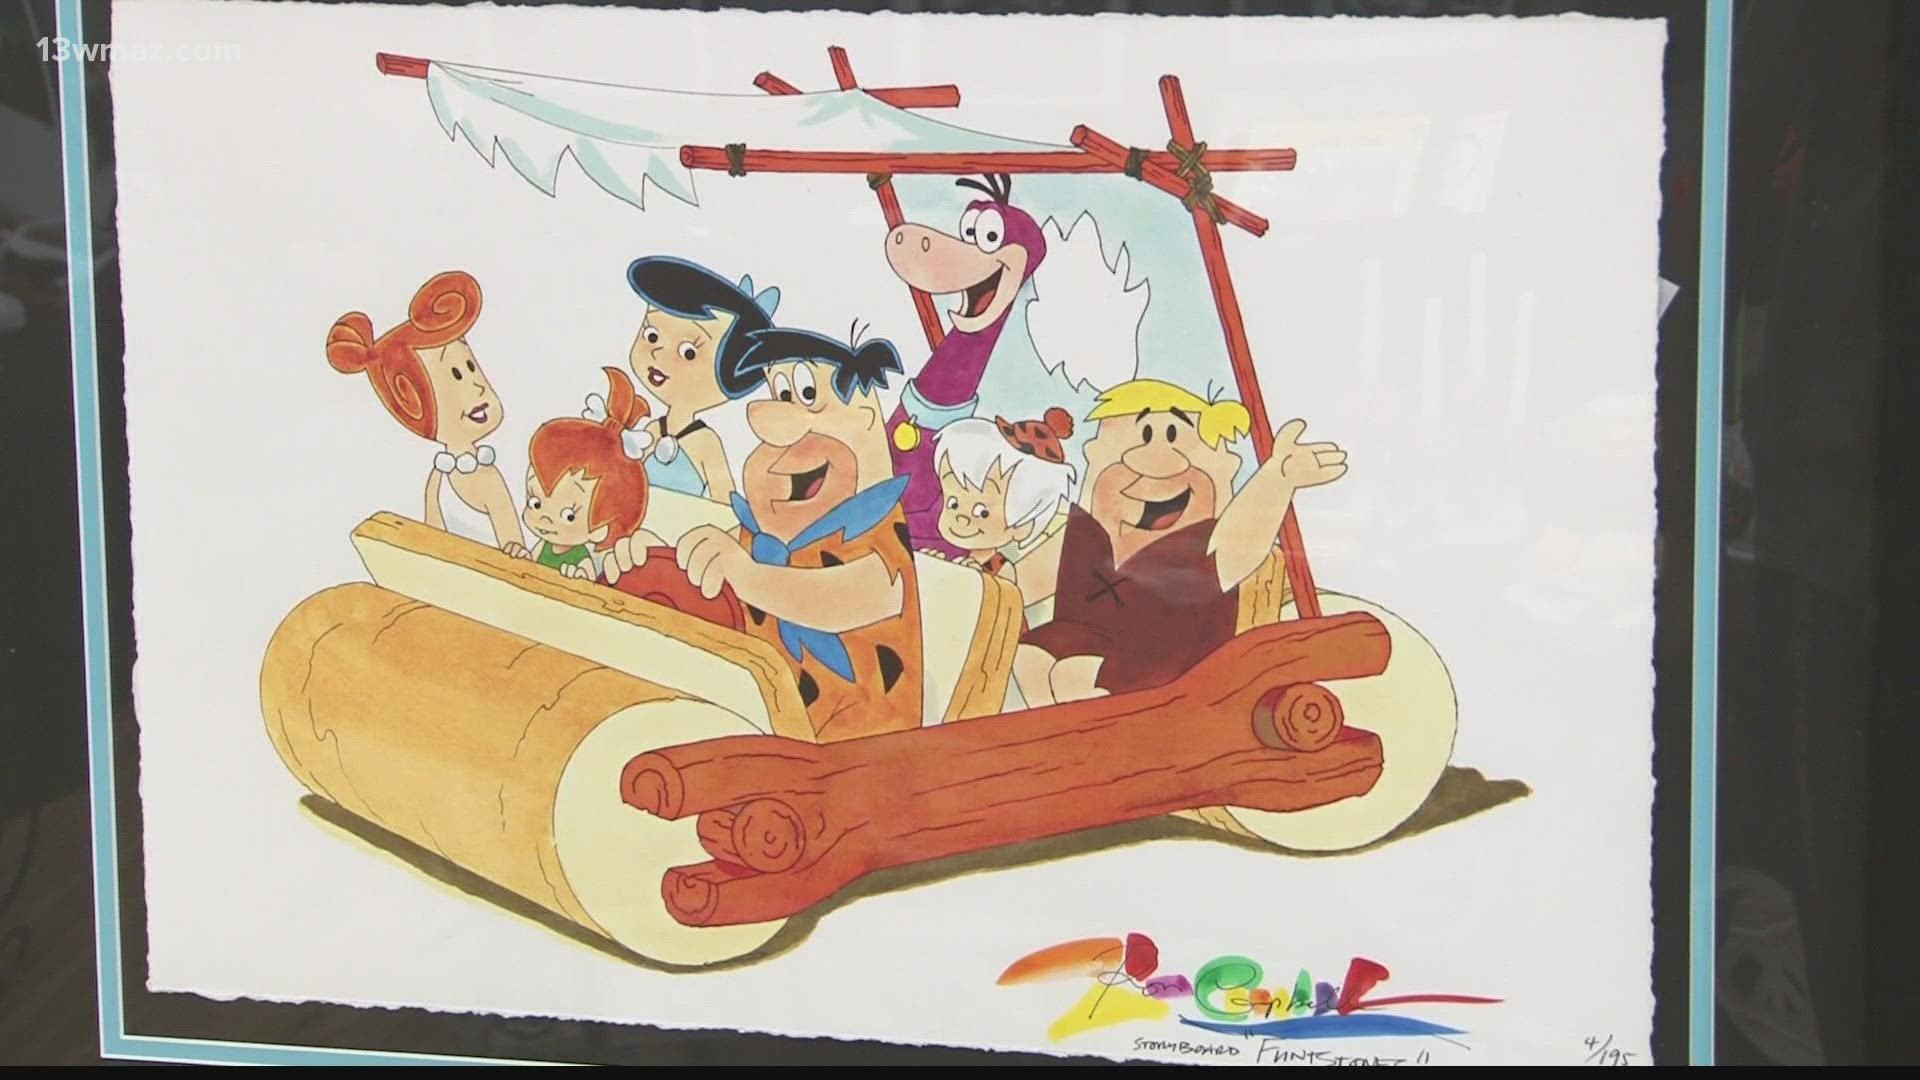 During retirement, Ron Campbell made paintings of several of the cartoons he was involved with such as "Popeye," "Ed, Edd n Eddy", and many more.